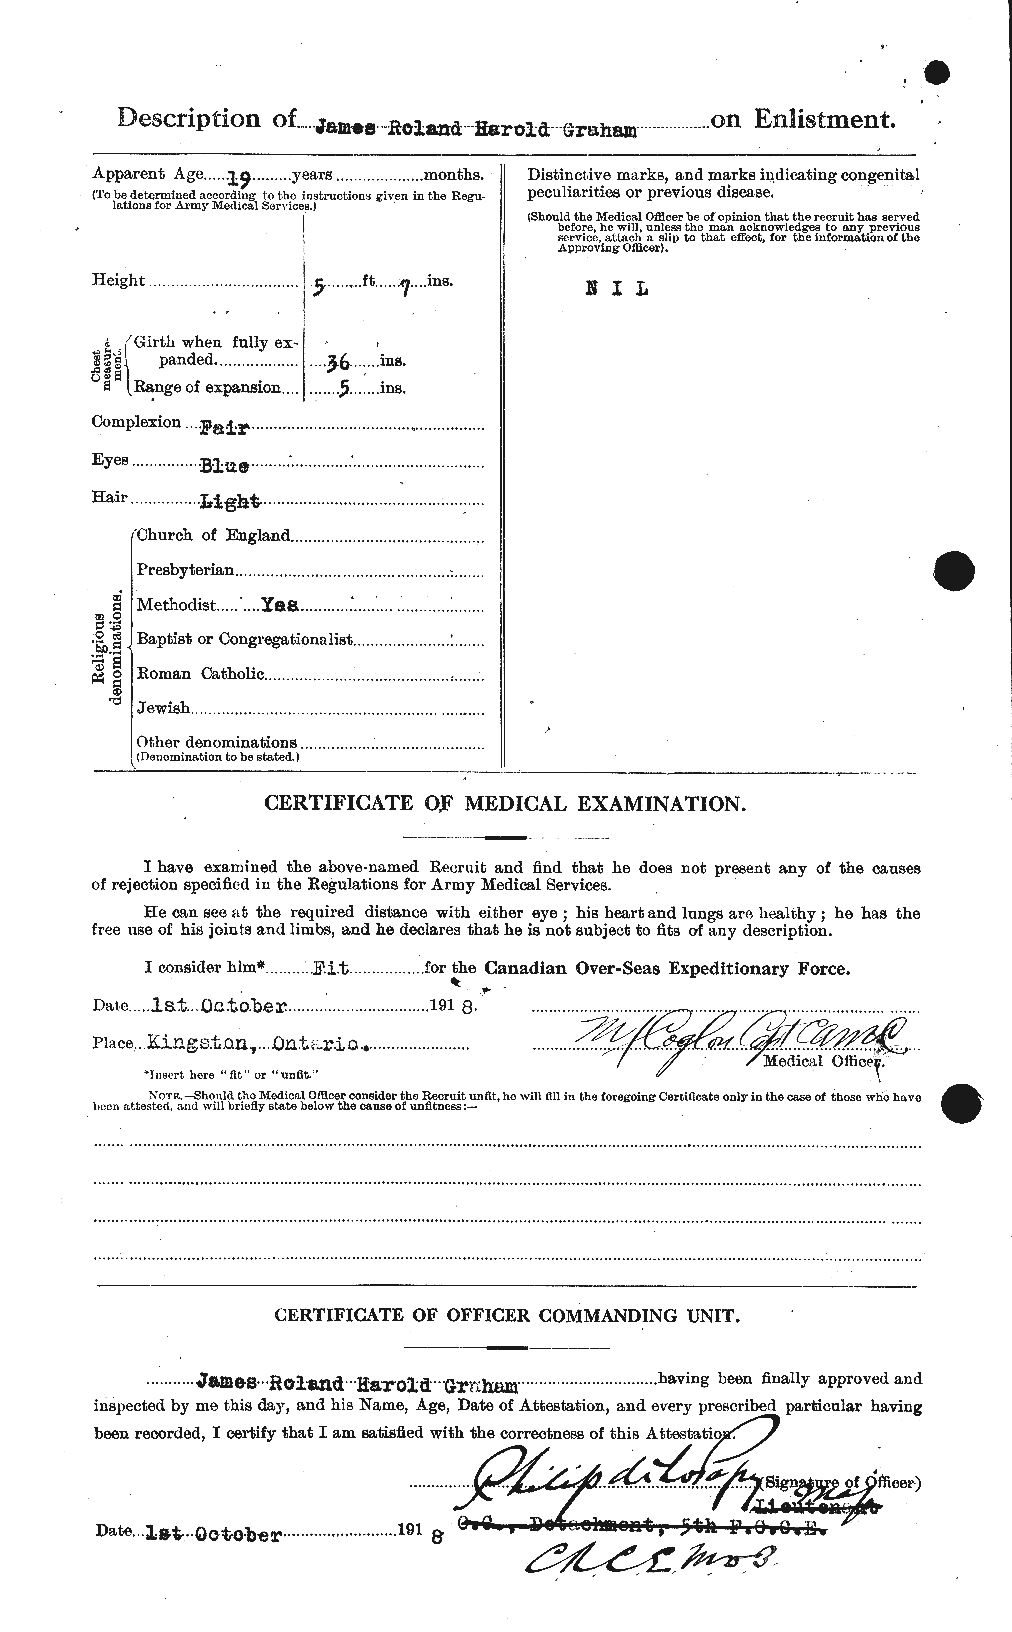 Personnel Records of the First World War - CEF 359095b